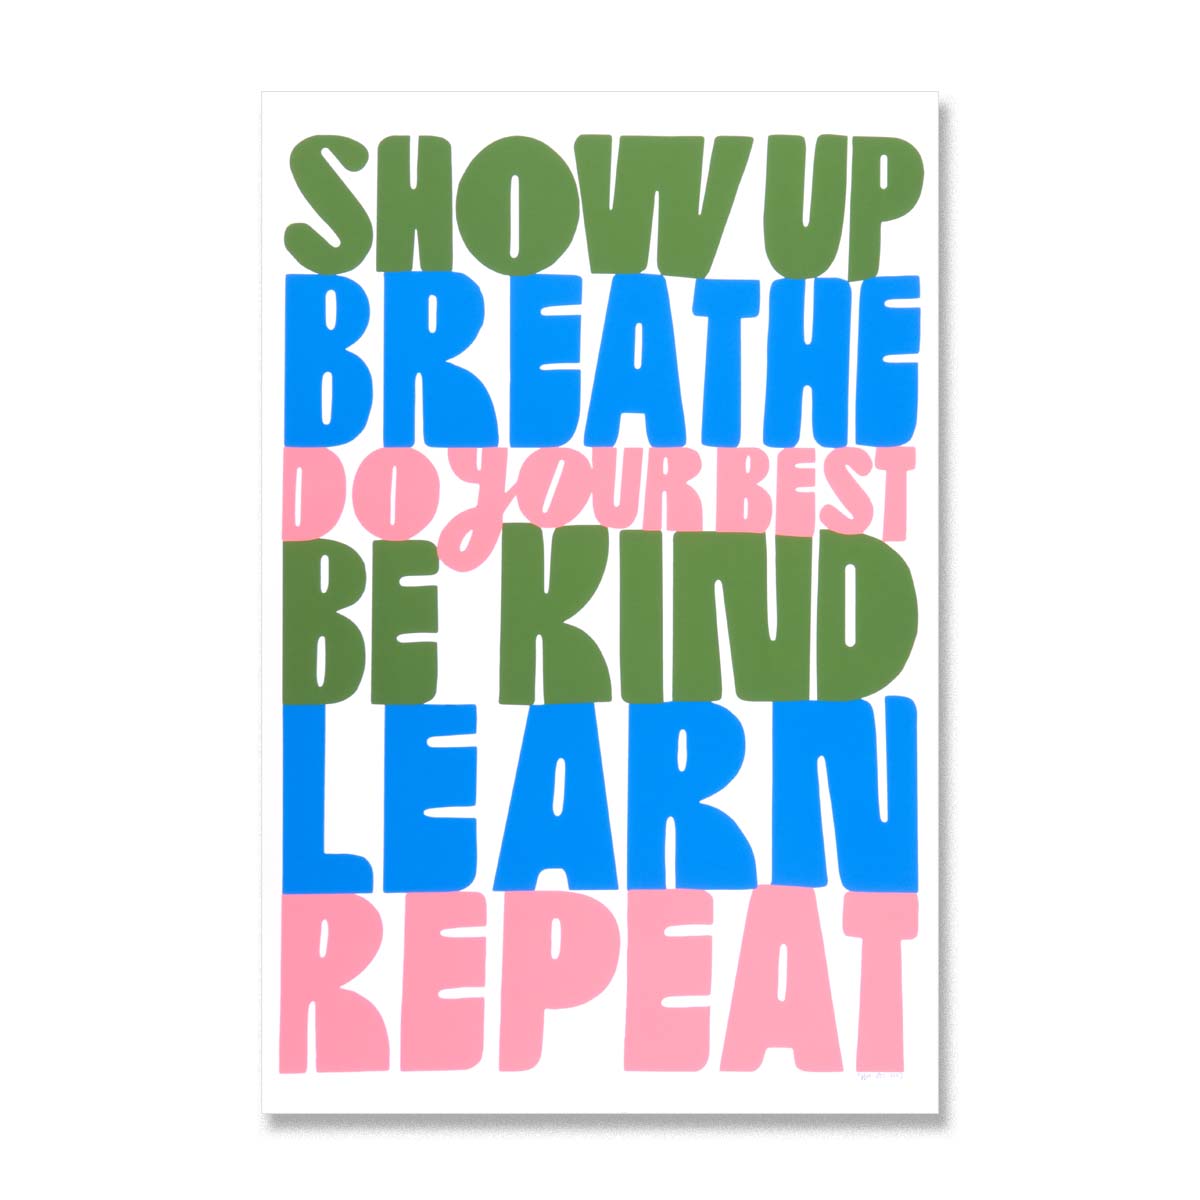 Show Up Breathe - Limited Edition Serigraph